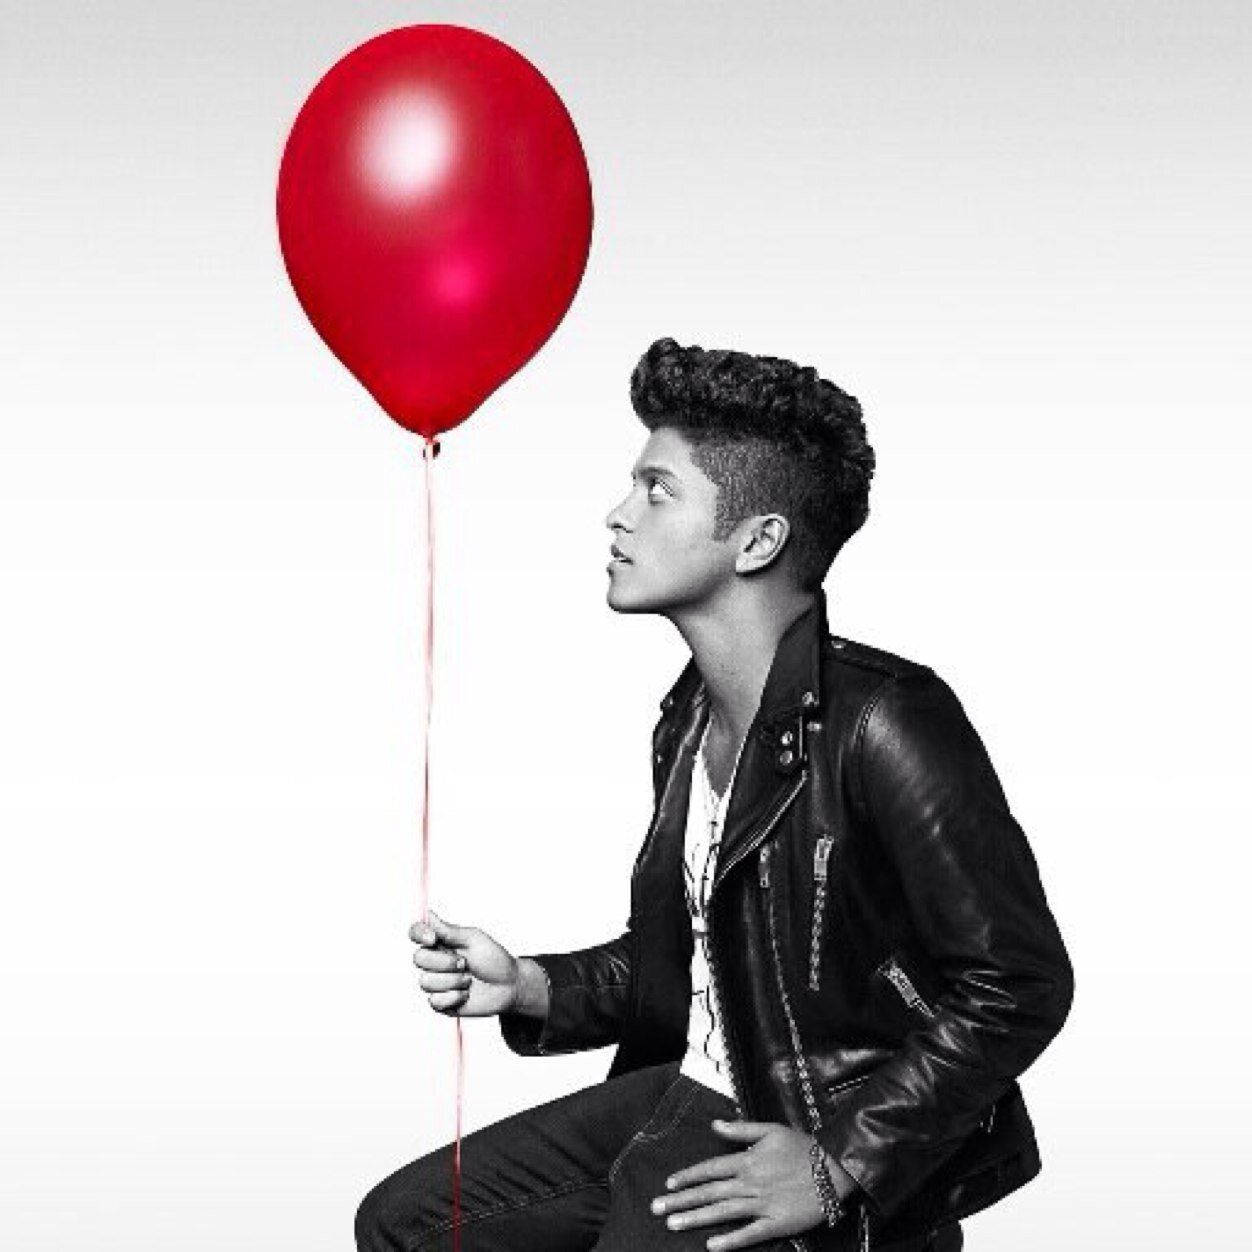 Bruno Mars With Red Balloon